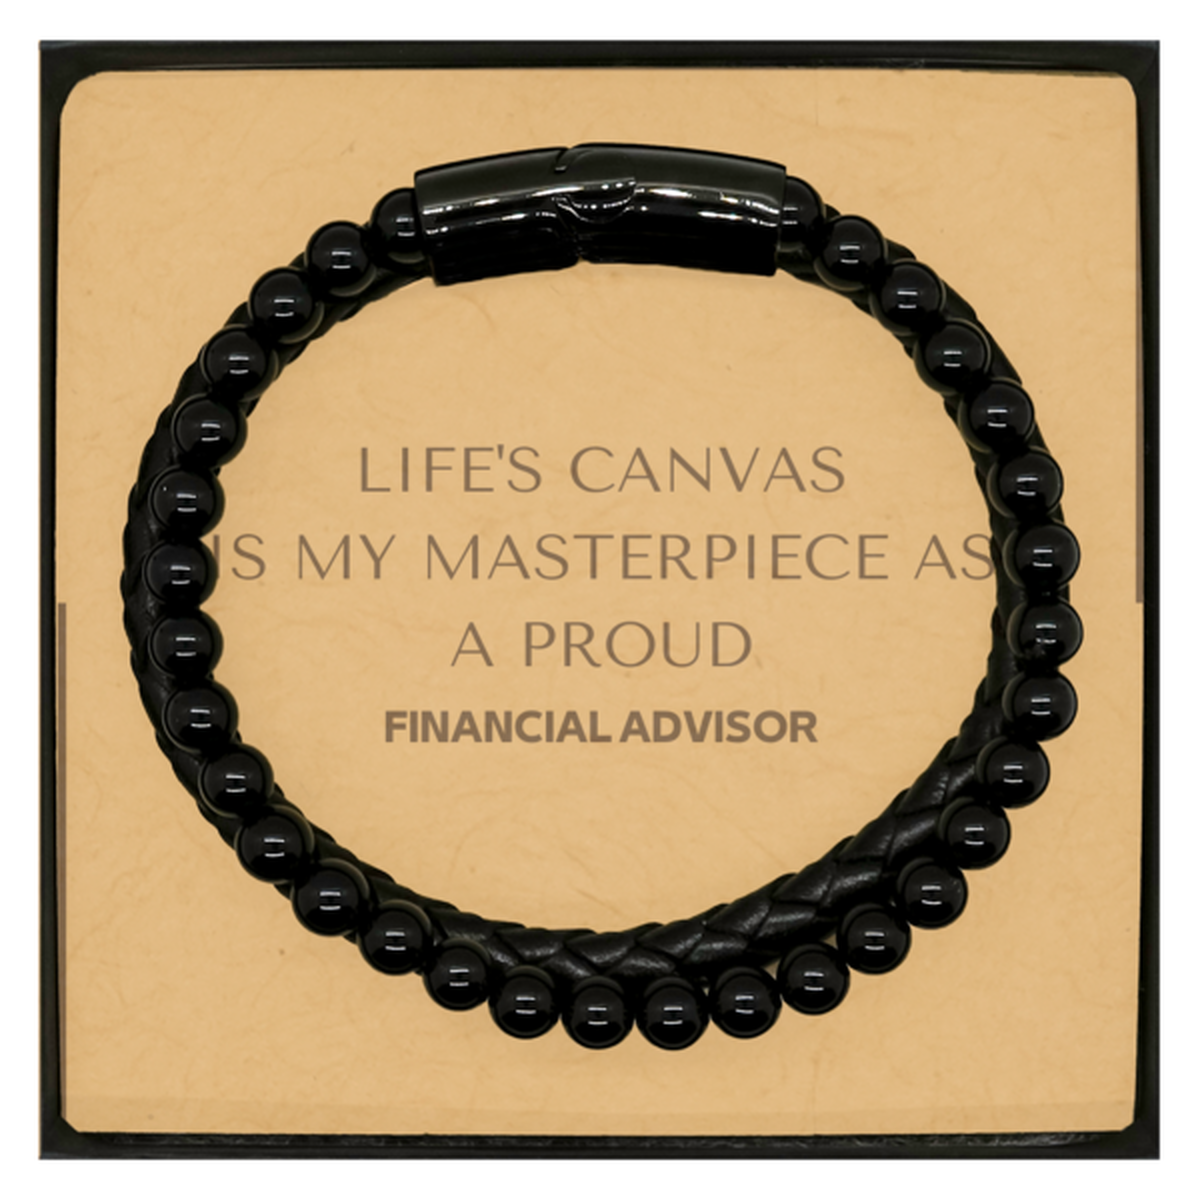 Proud Financial Advisor Gifts, Life's canvas is my masterpiece, Epic Birthday Christmas Unique Stone Leather Bracelets For Financial Advisor, Coworkers, Men, Women, Friends